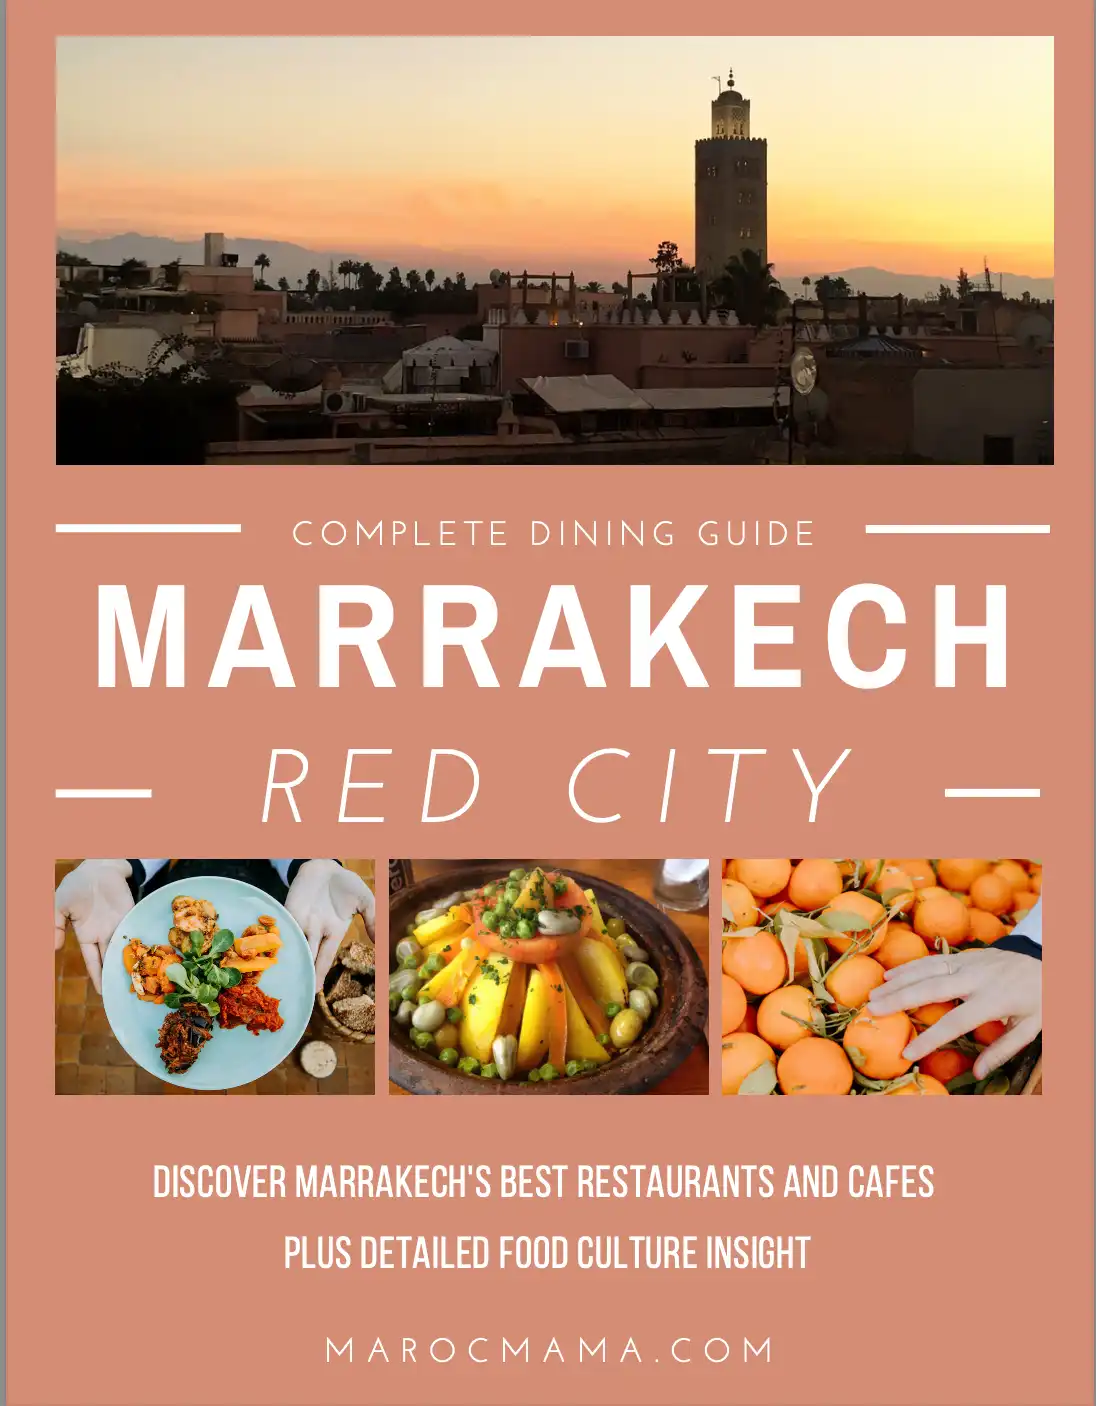 The Complete Guide to Eating in Marrakech